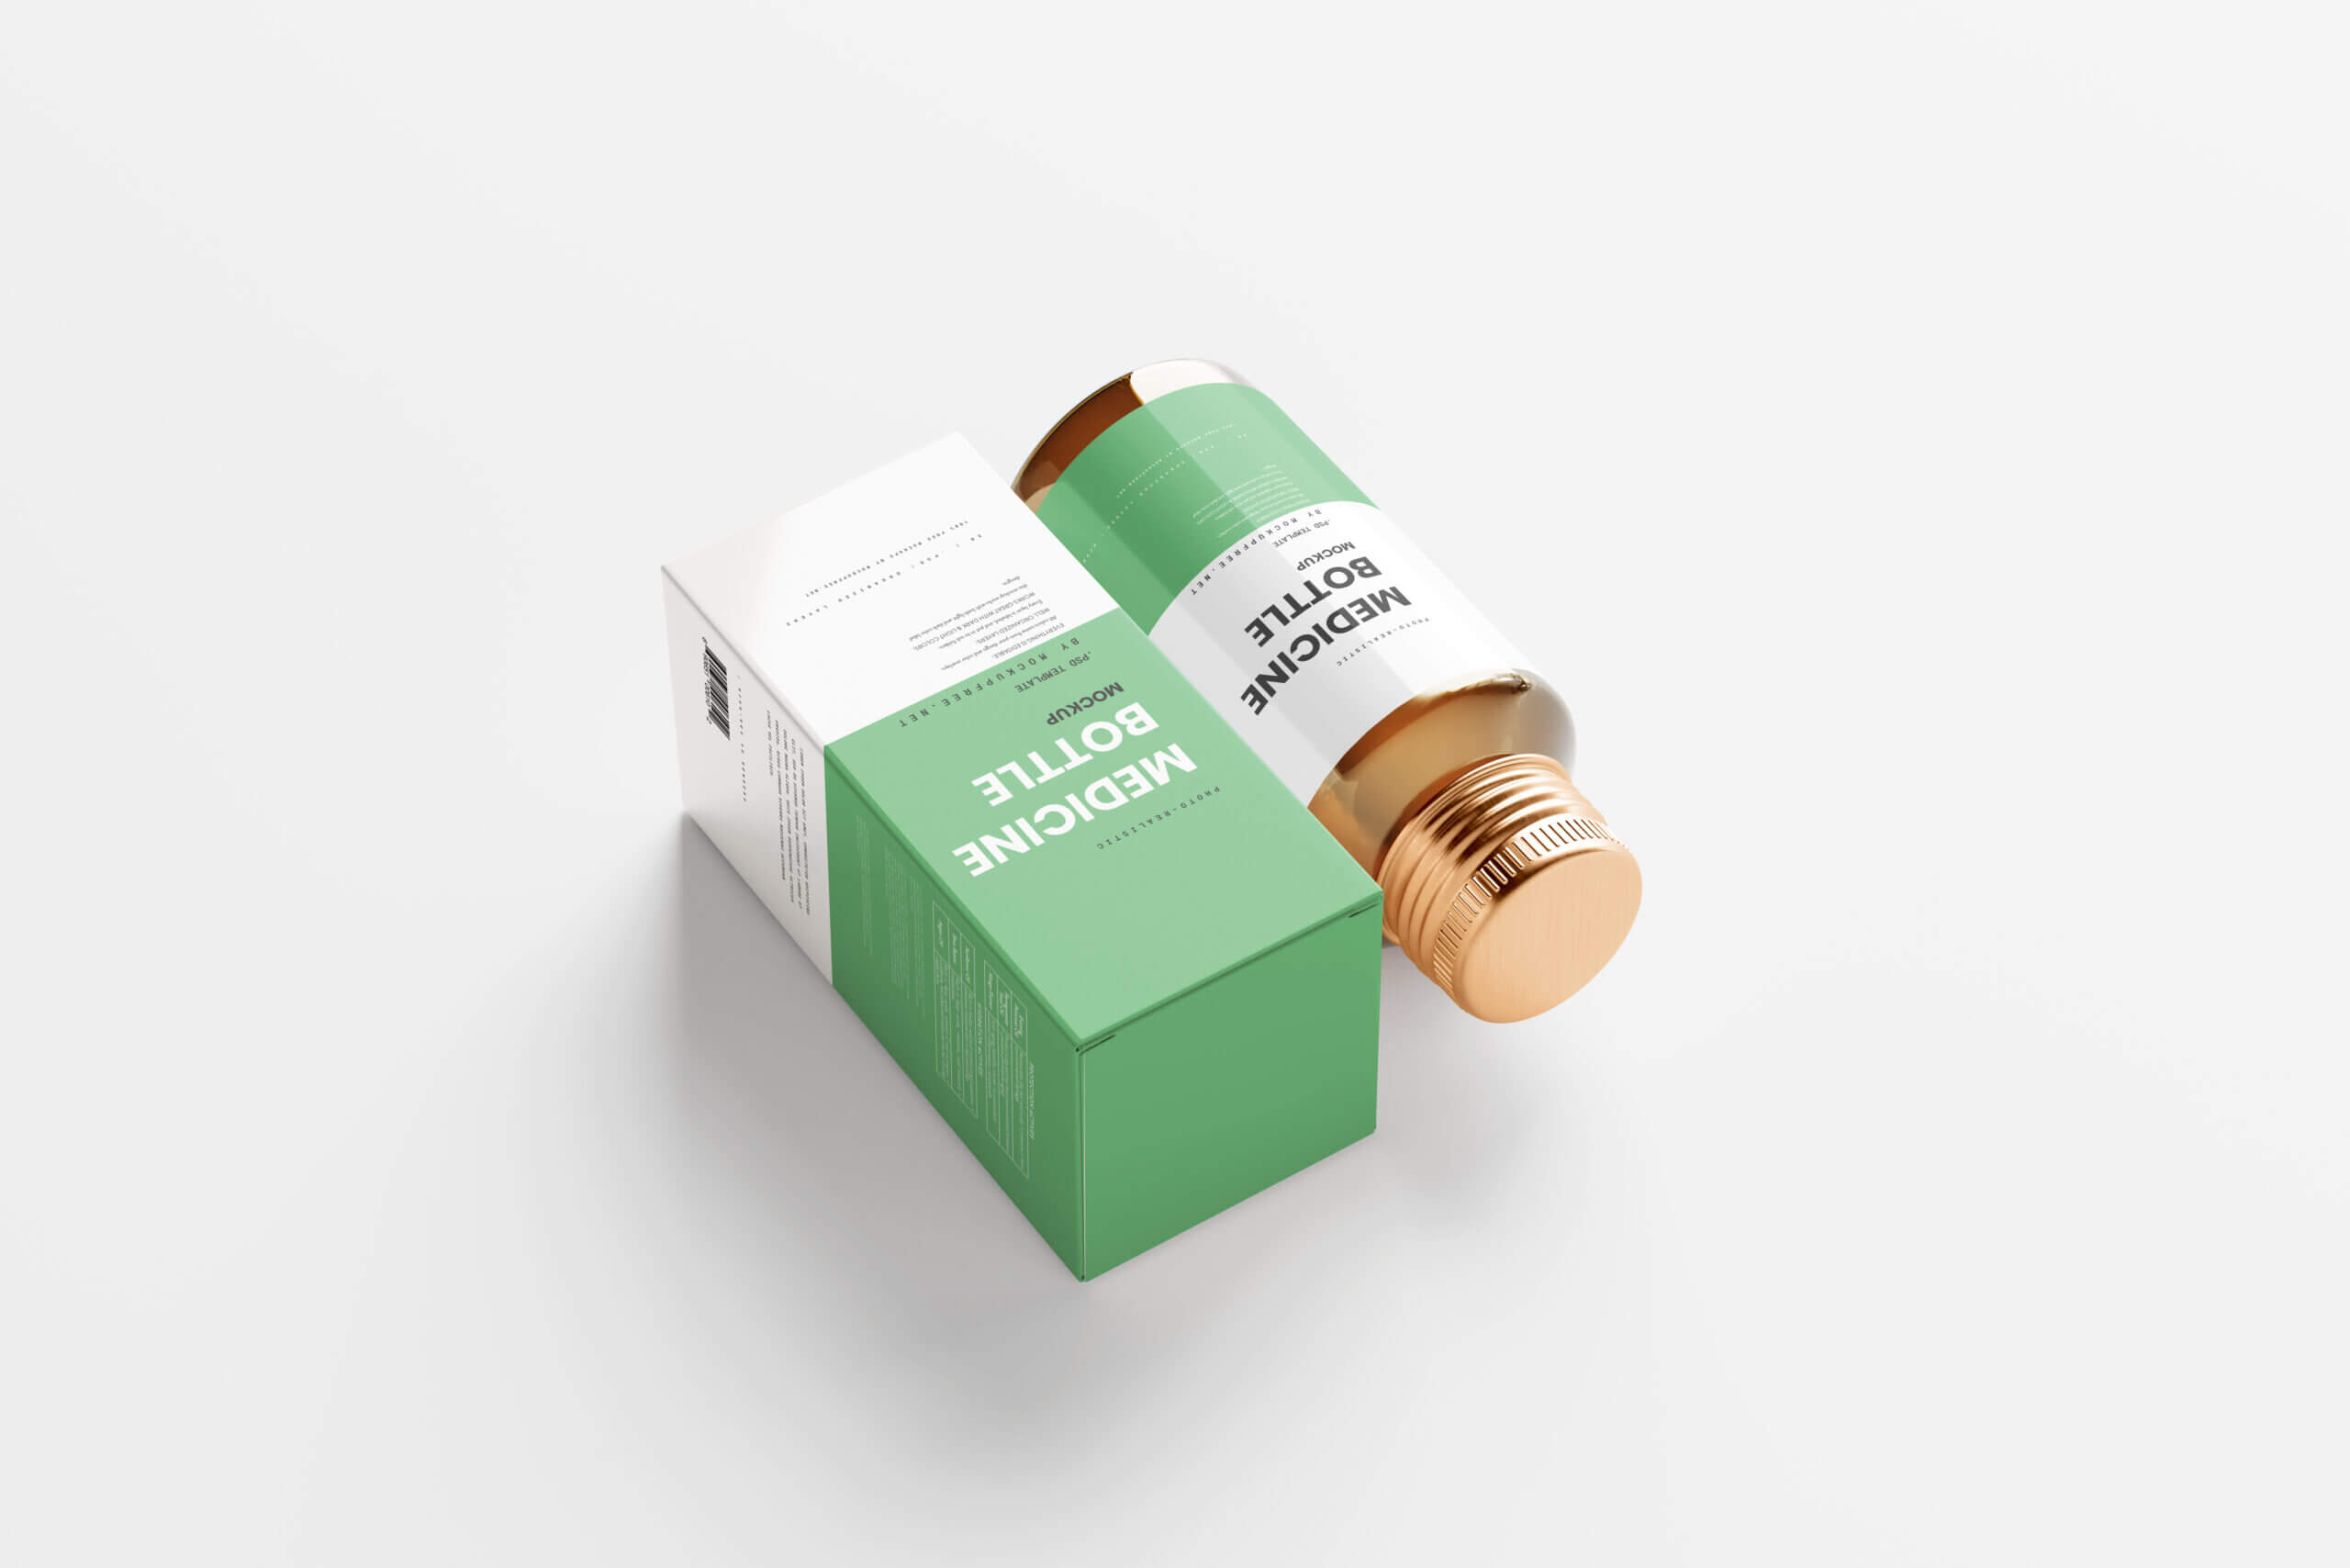 10 Free Amber Medicine Bottle With Box Mockup PSD Files7